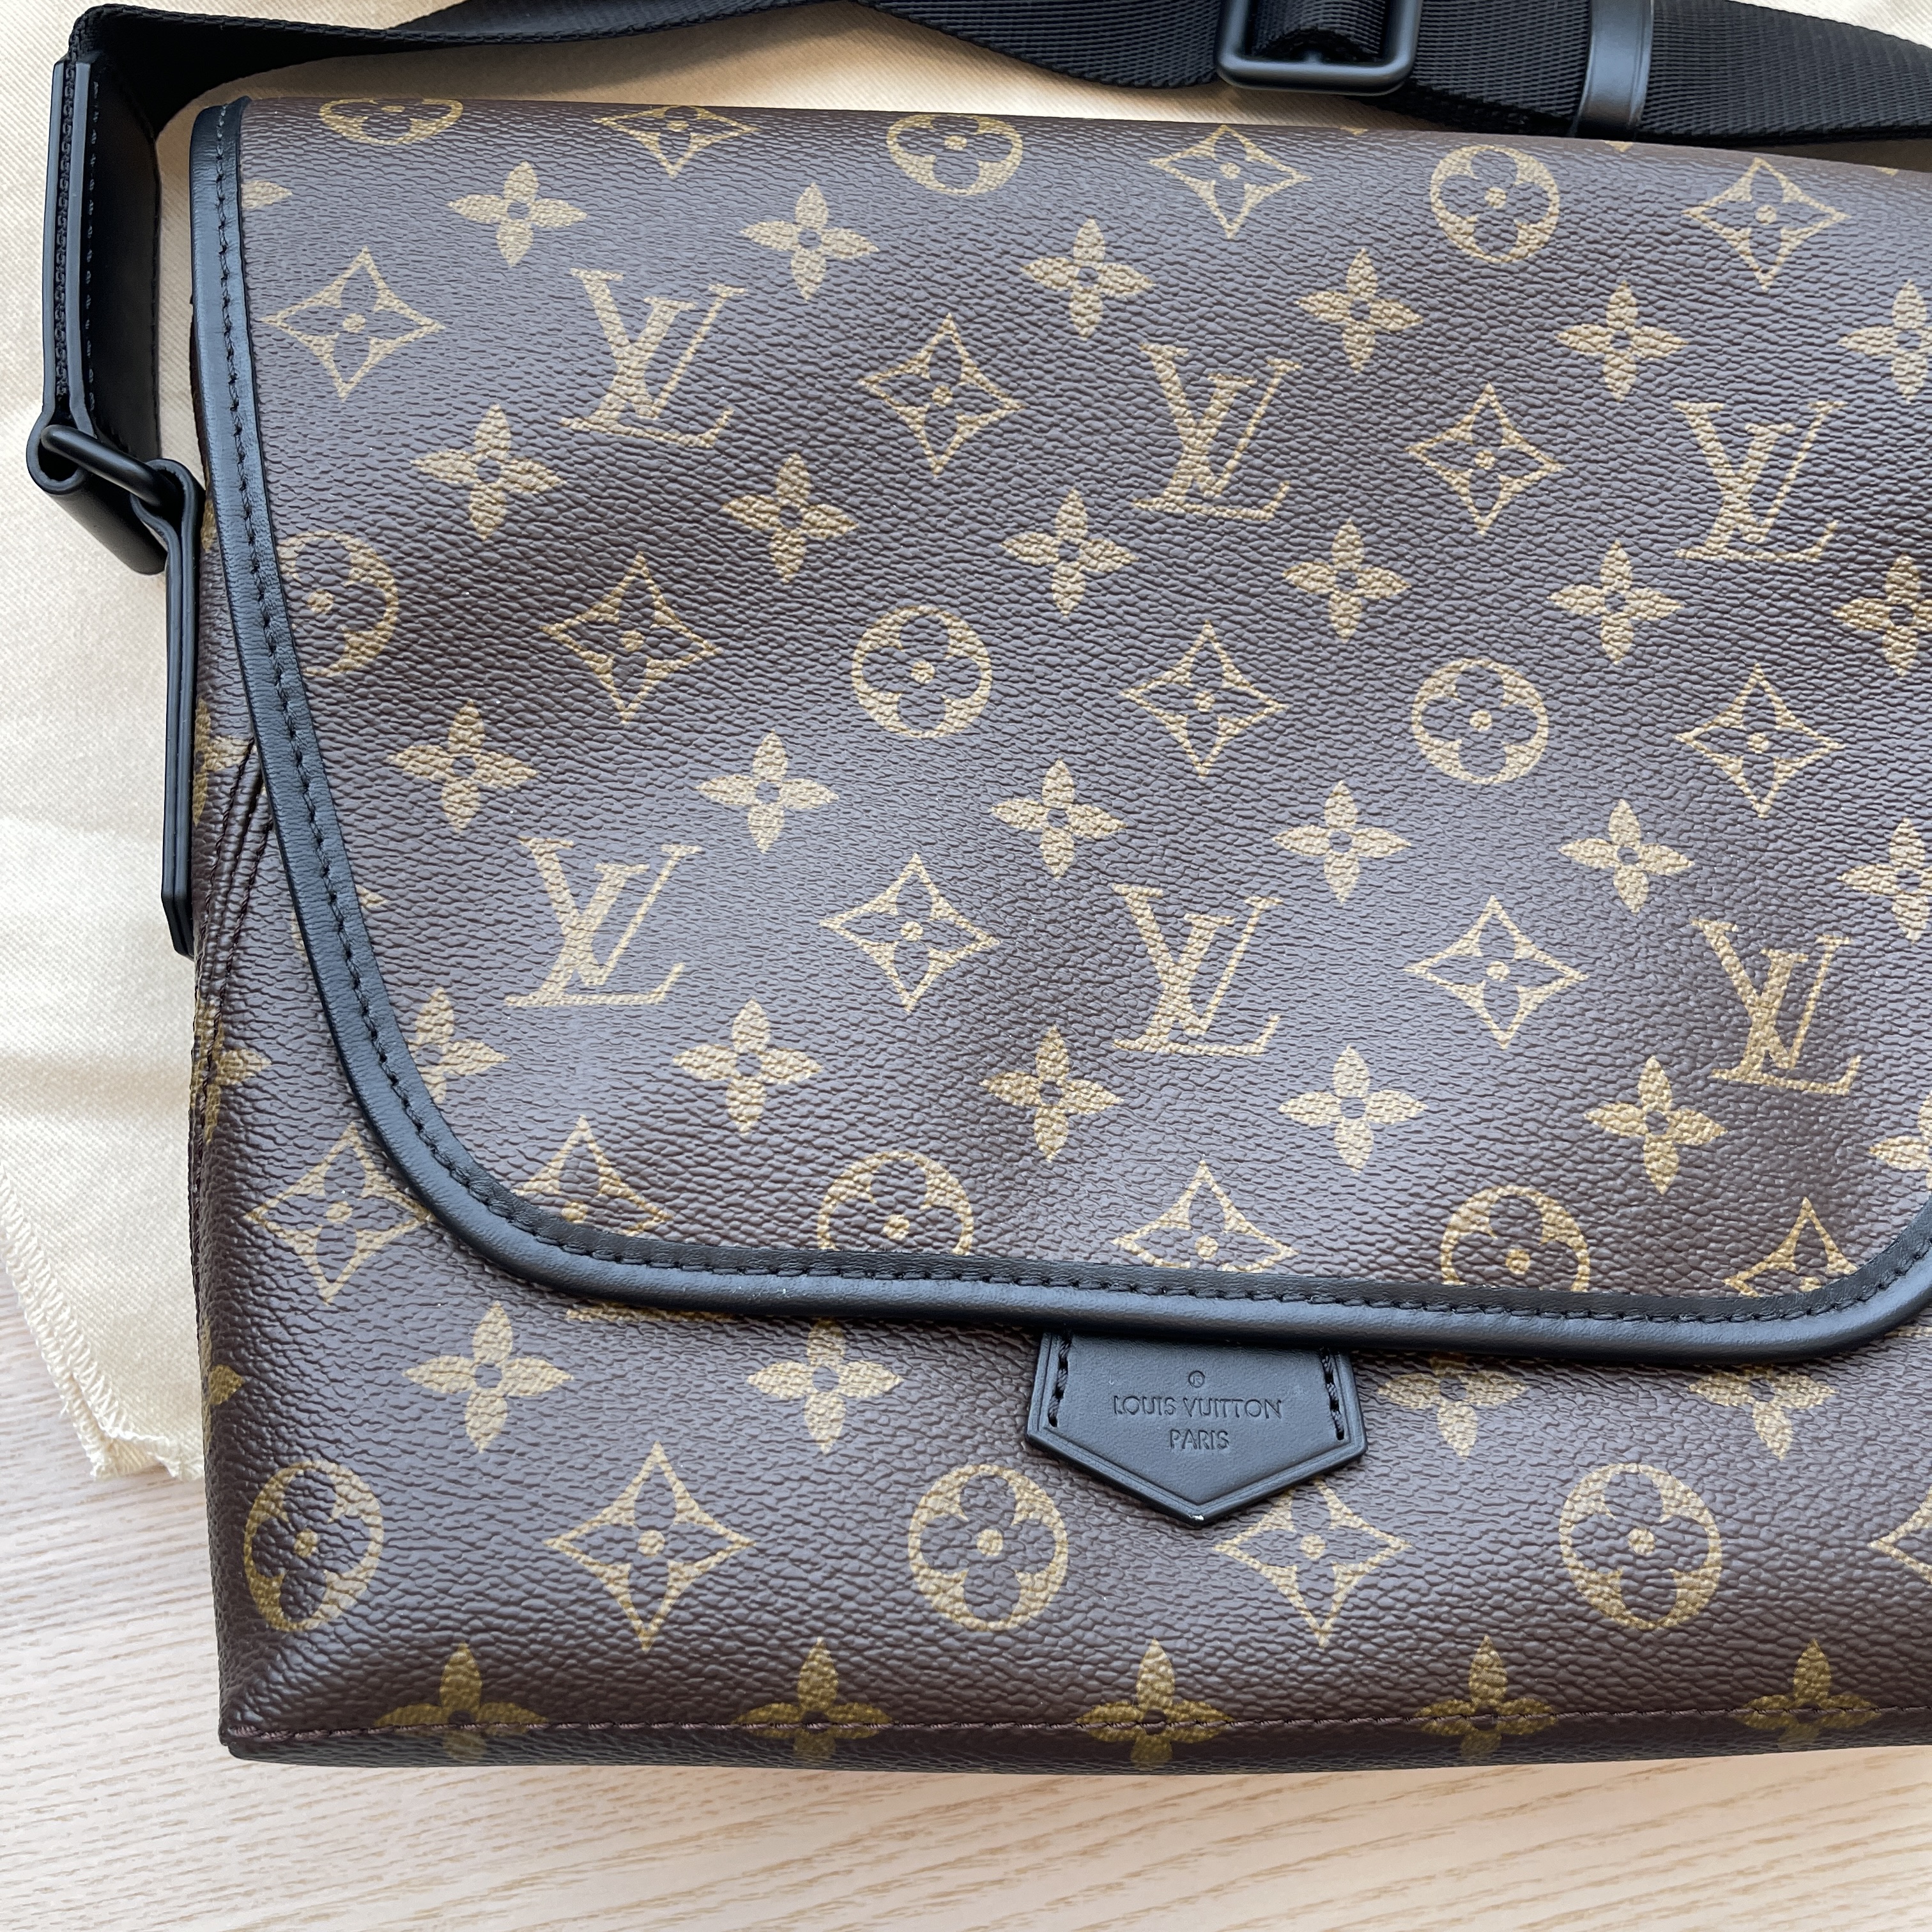 Tampa Jewelry & Loan on Instagram: LV Monogram Macassar Magnetic Messenger  bag. In like-new condition complete with box, dust cover, and original  receipt dated 2022. We're priced below market comps and original